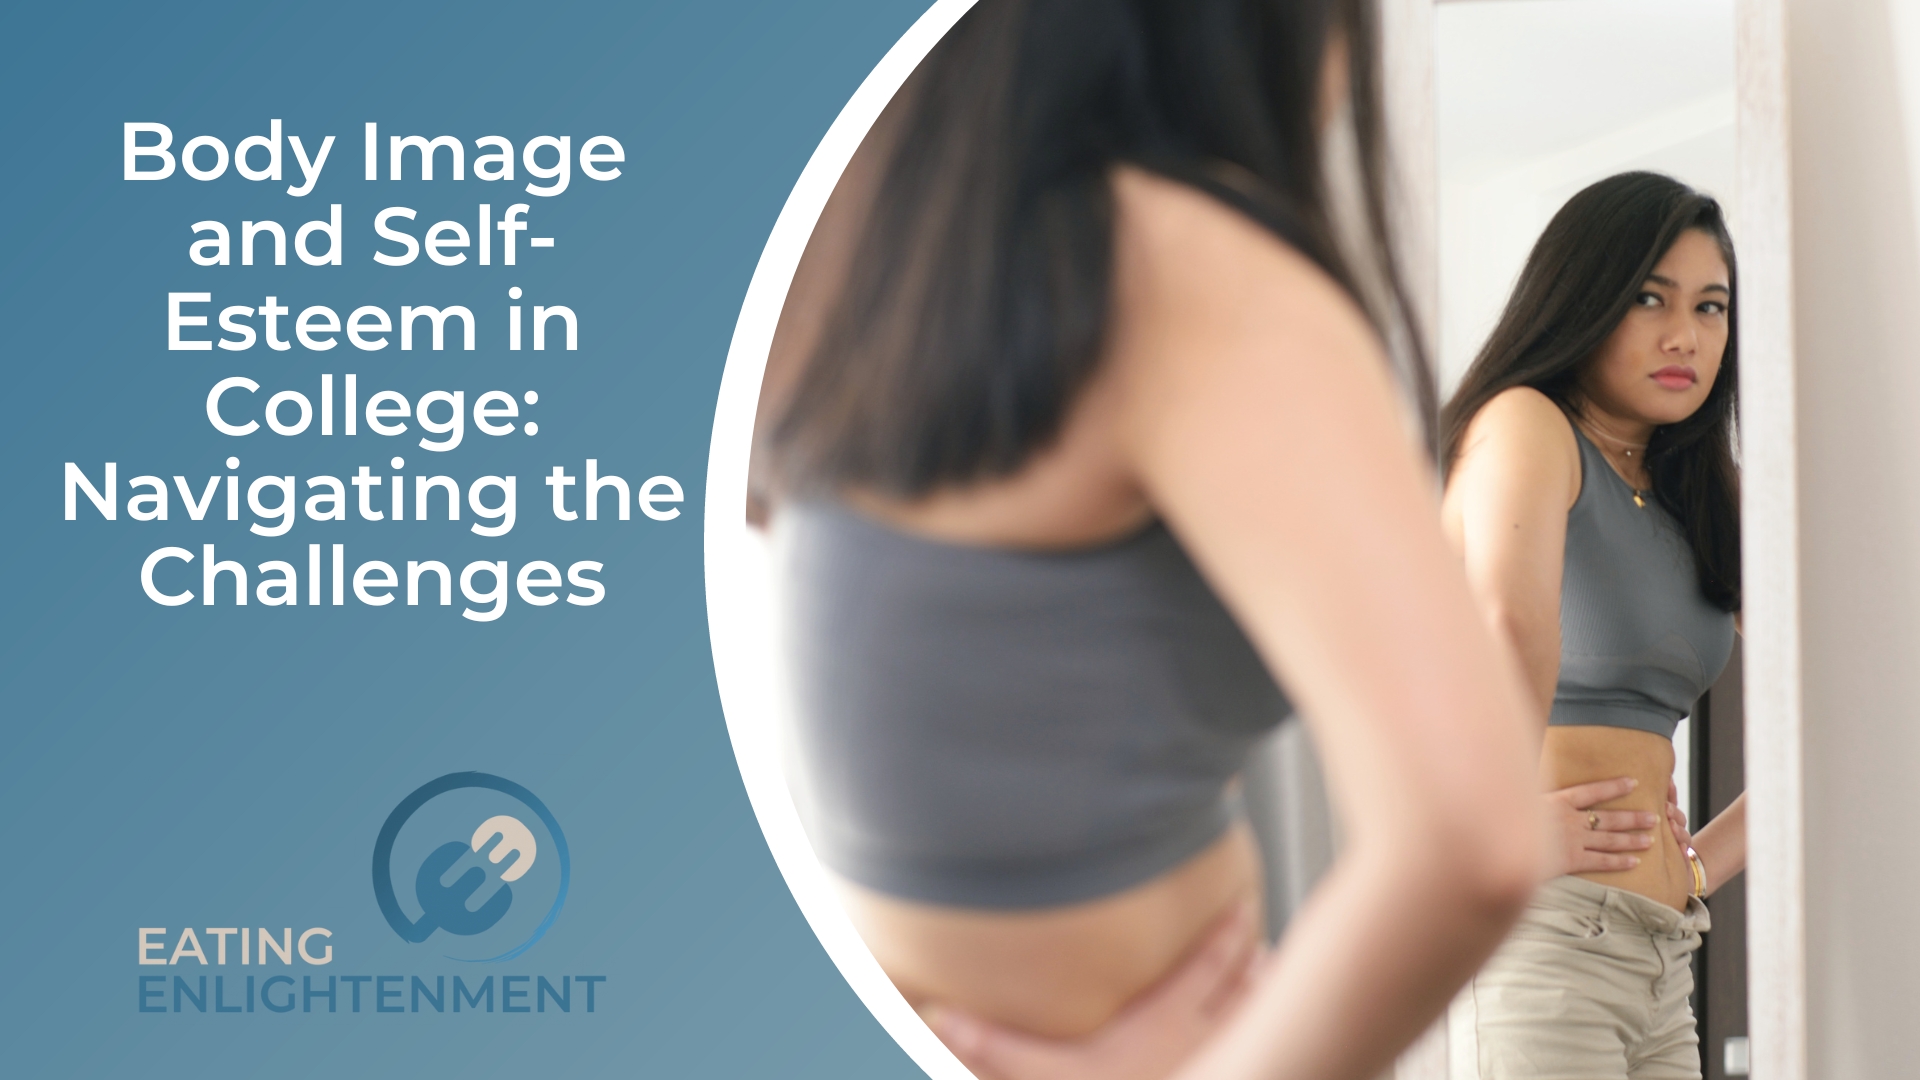 Body Image and Self-Esteem in College: Navigating the Challenges